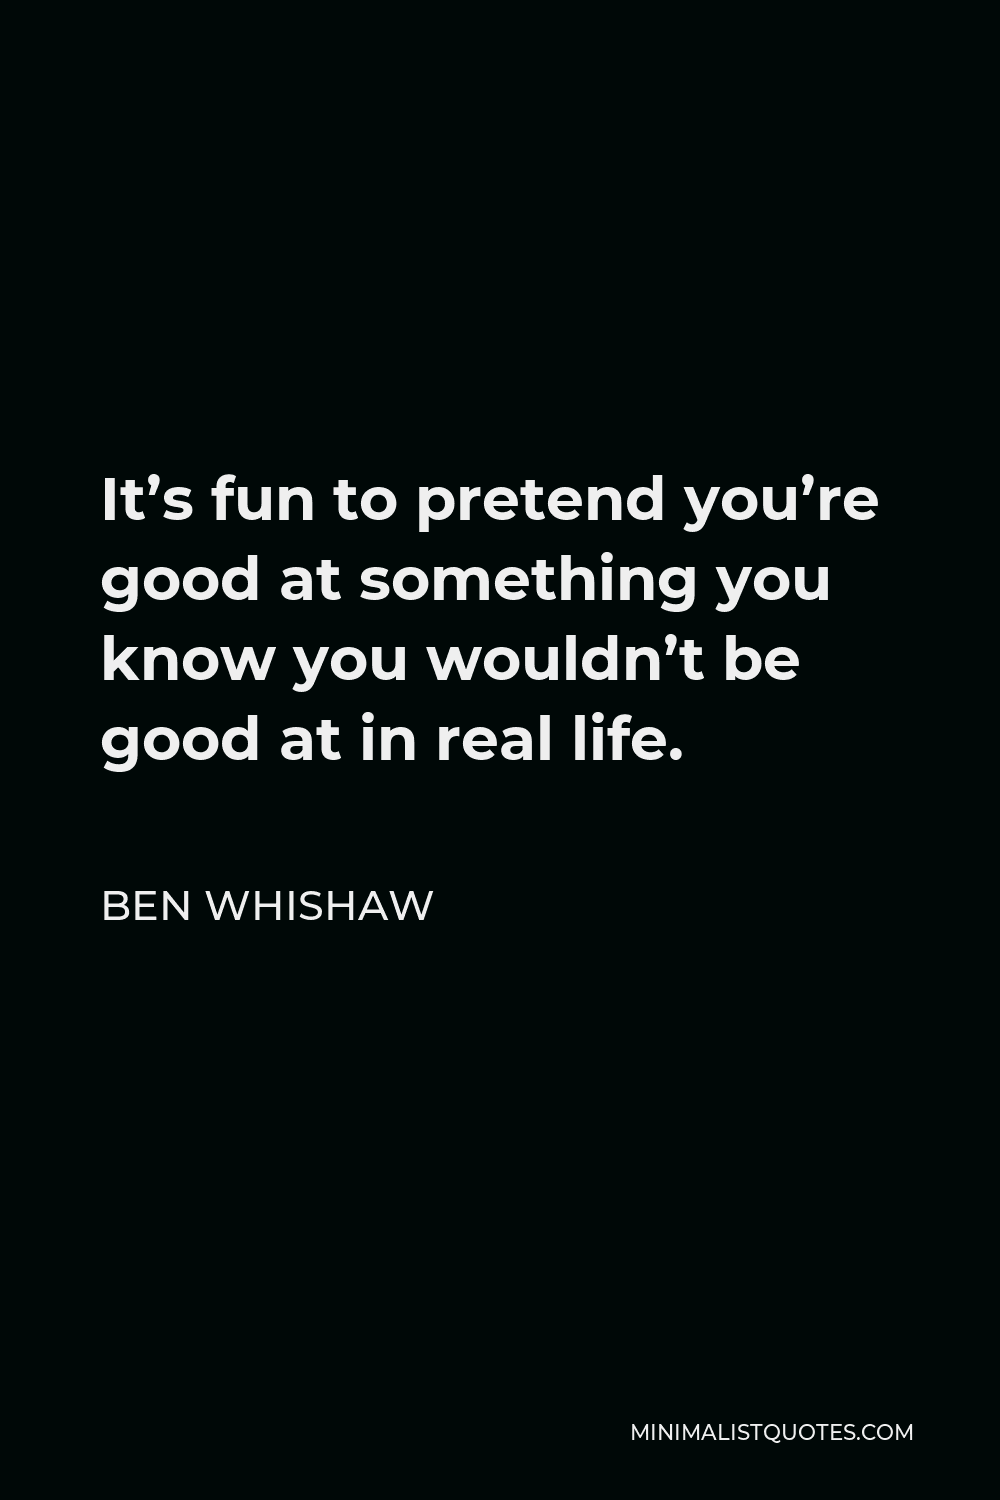 Ben Whishaw Quote - It’s fun to pretend you’re good at something you know you wouldn’t be good at in real life.